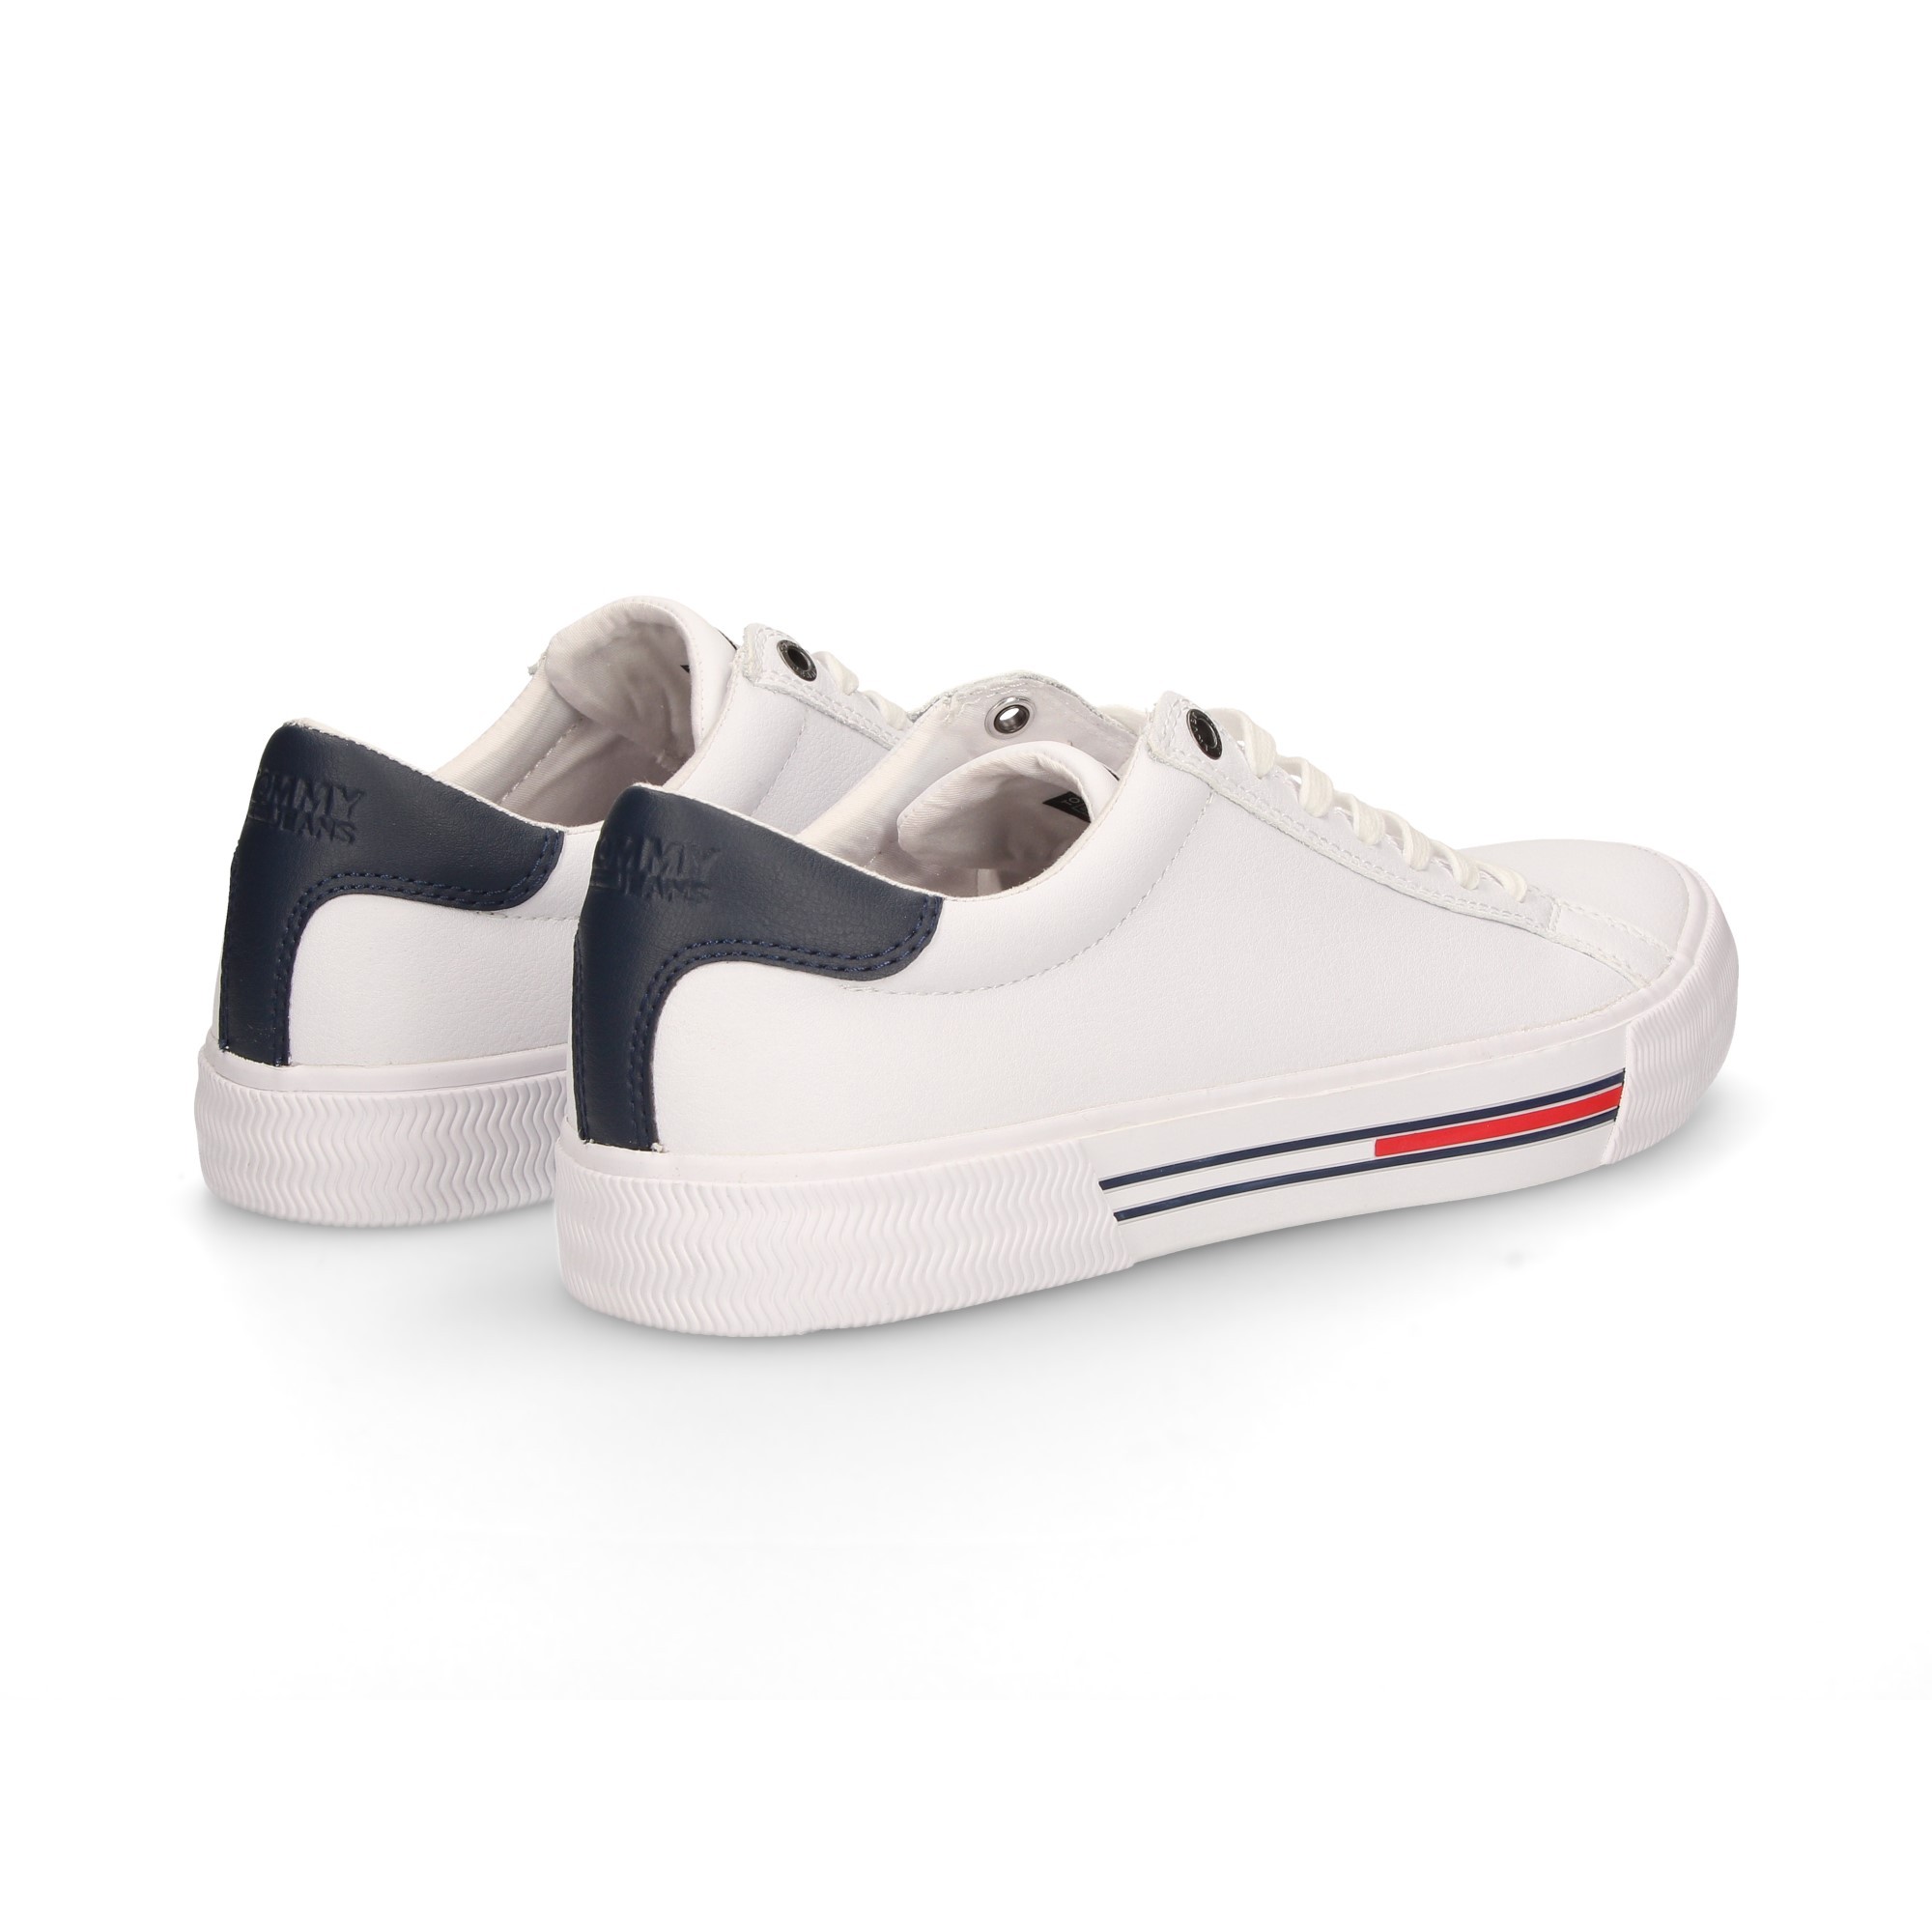 sporty-blue-heel-white-leather